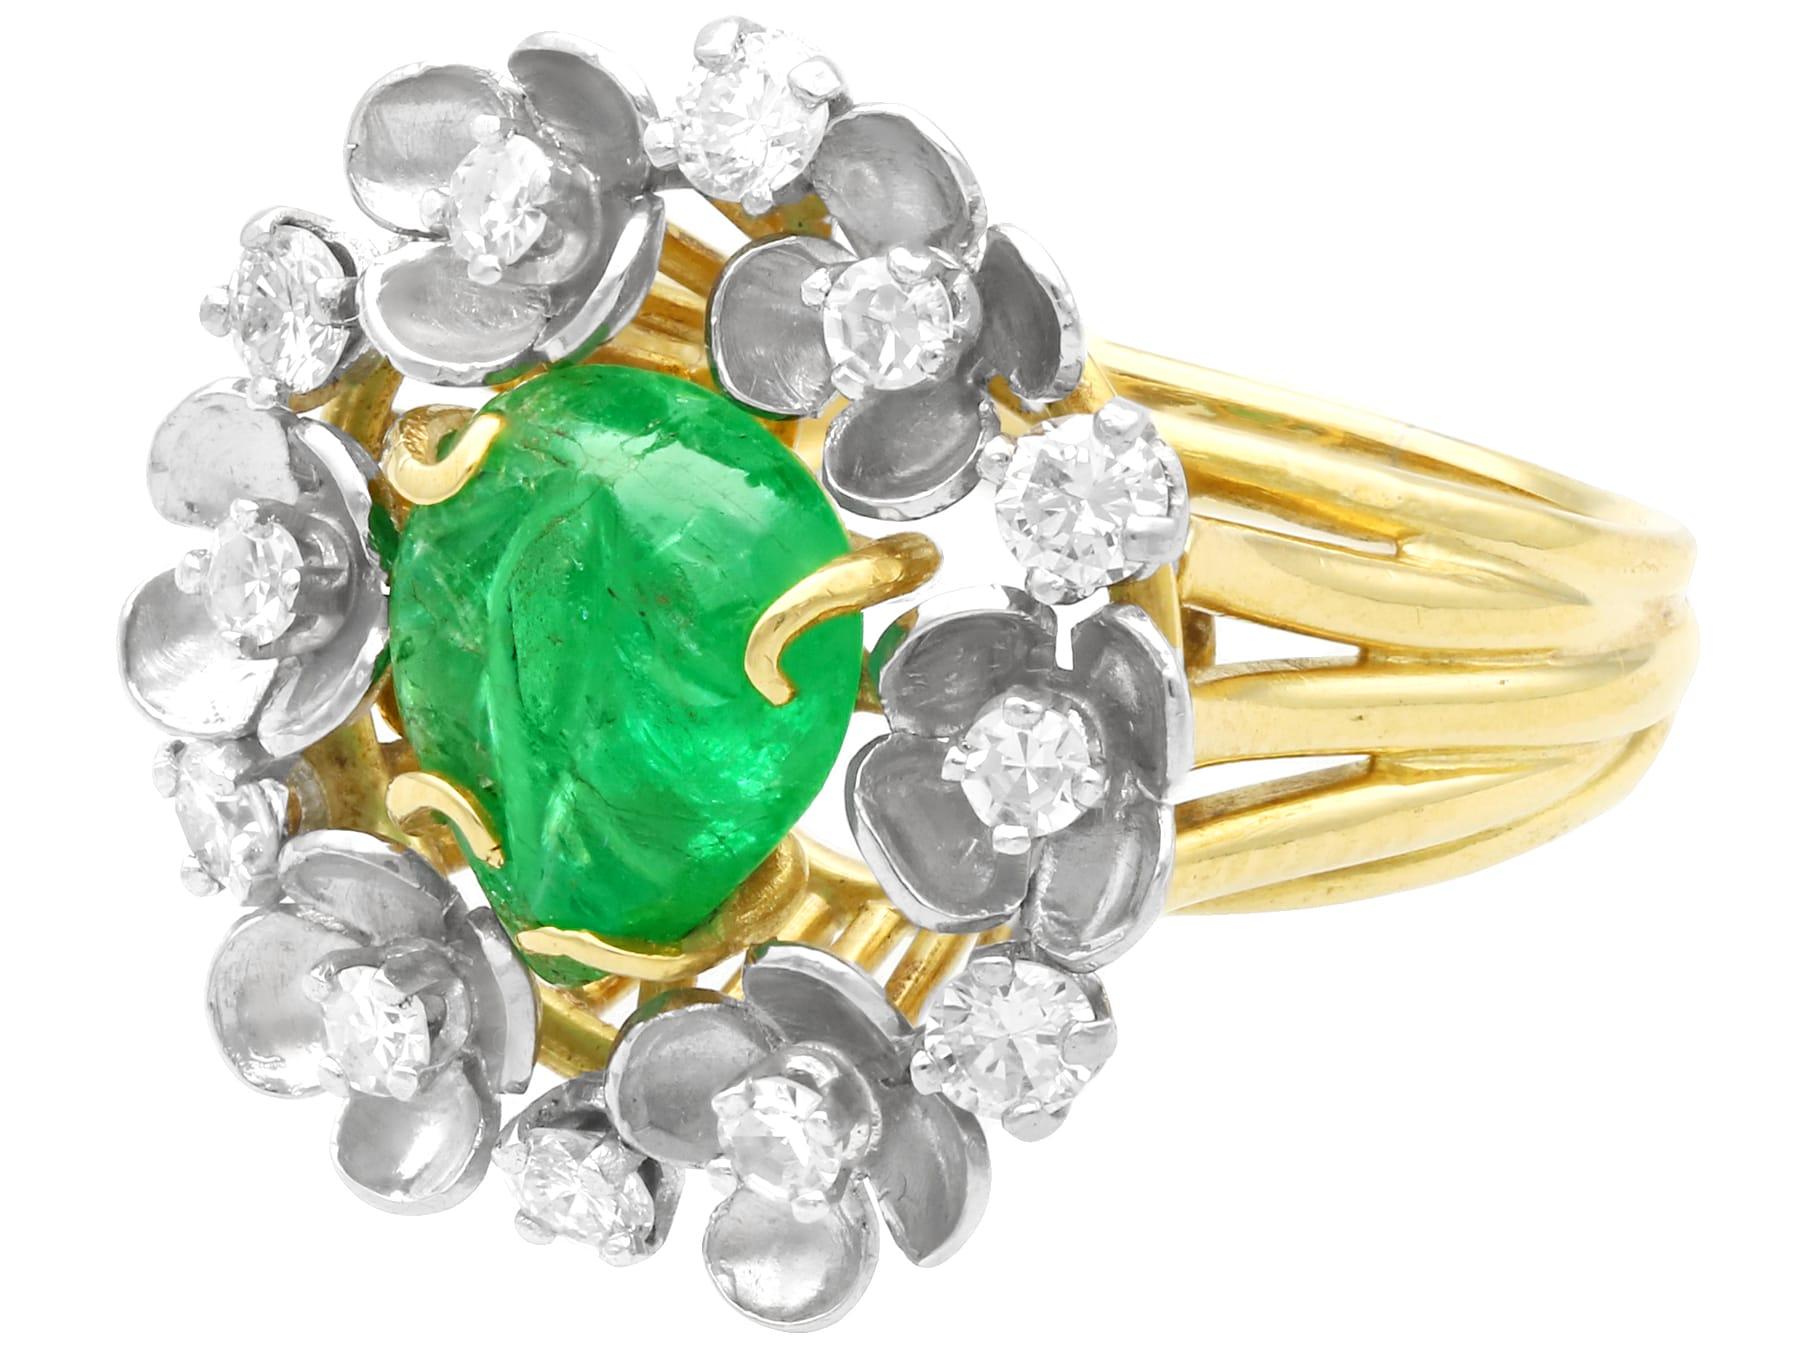 Cabochon Antique 1920s 2.42 Carat Emerald Diamond Gold Cocktail Cluster Ring For Sale